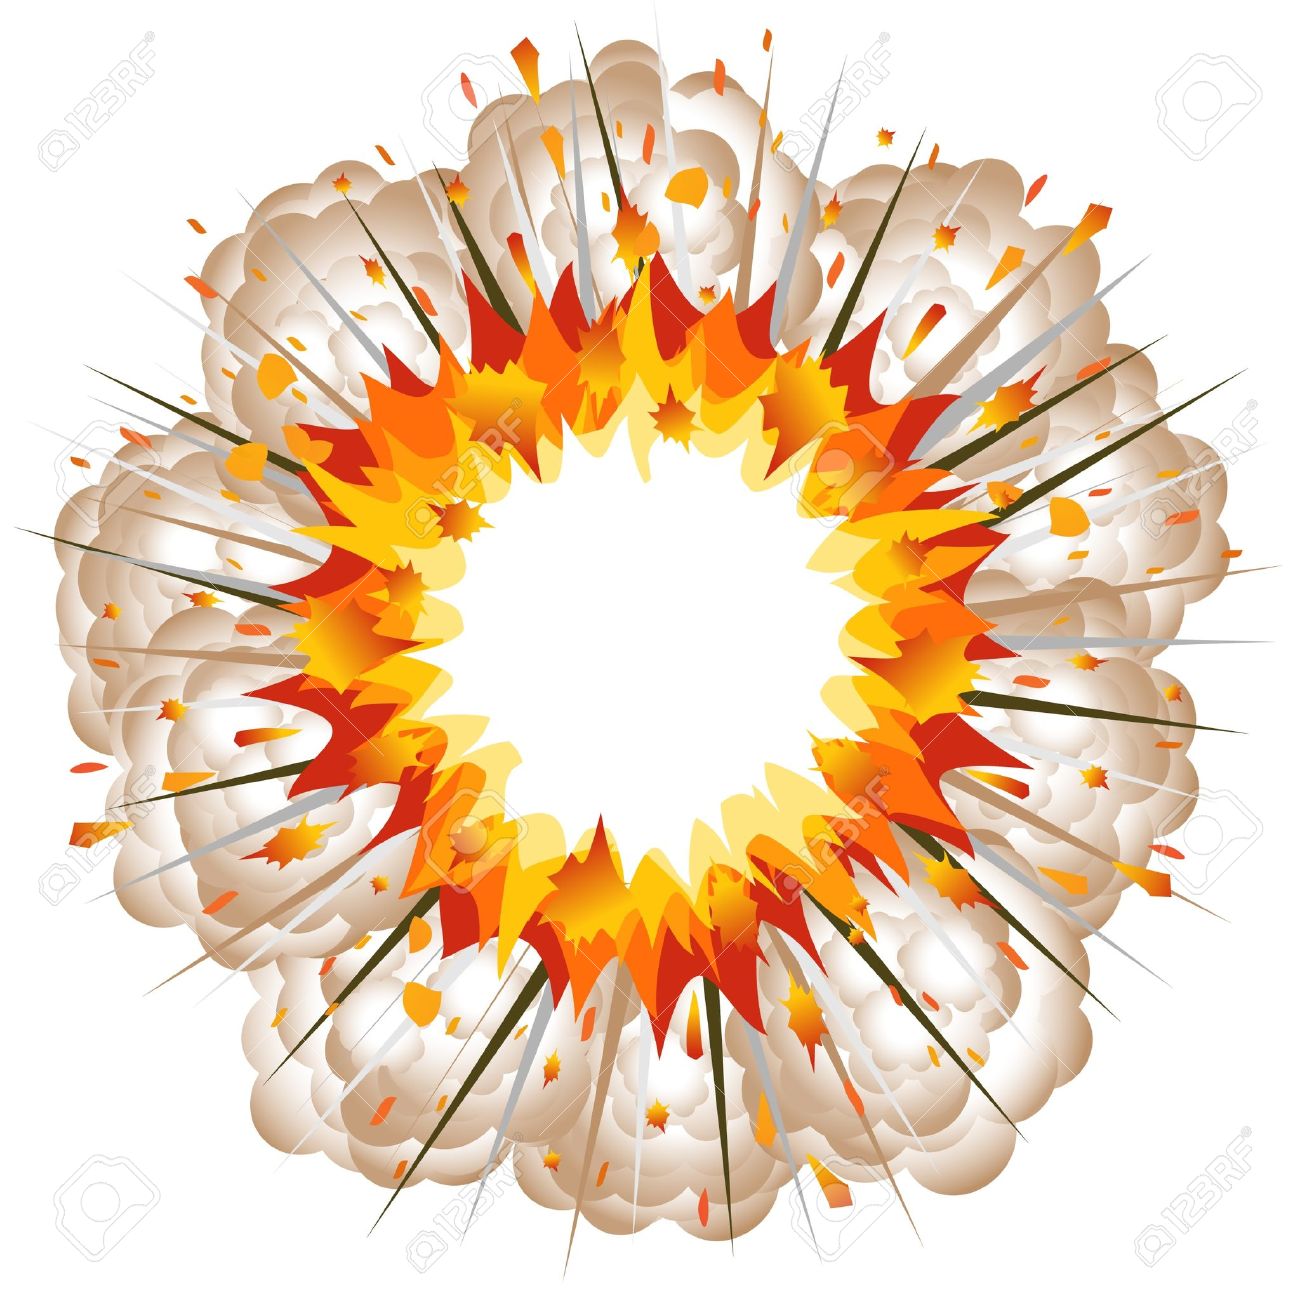 fire clipart fire explosion #14290